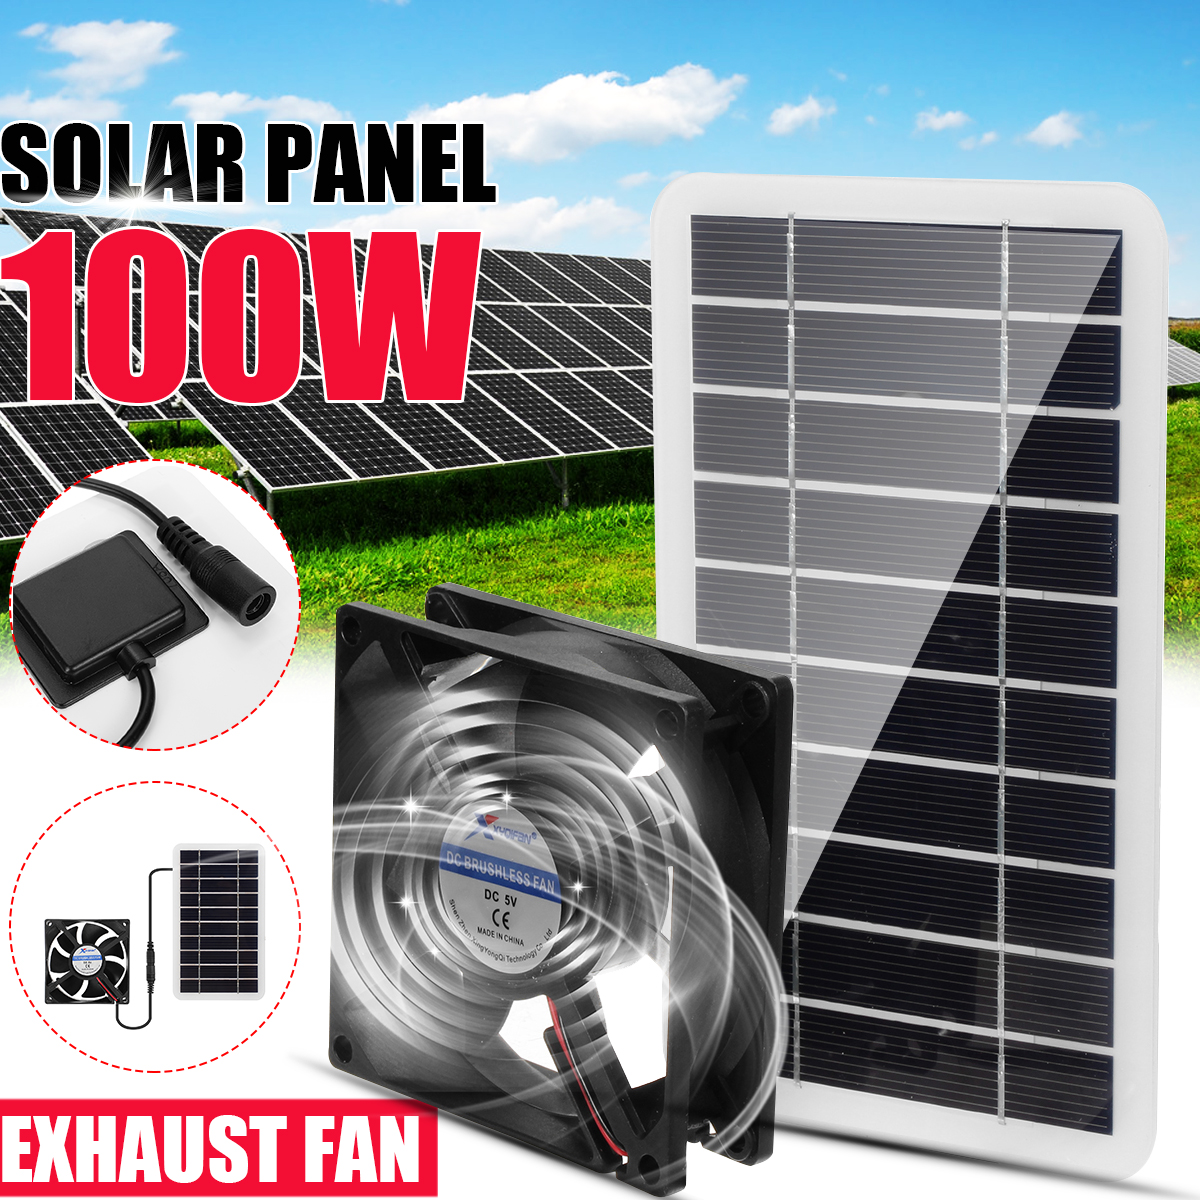 100W-Portable-Solar-Panel-Kit-Dual-DC-5V-USB-Charger-Kit-Solar-Power-Controller-with-Fans-1905897-1